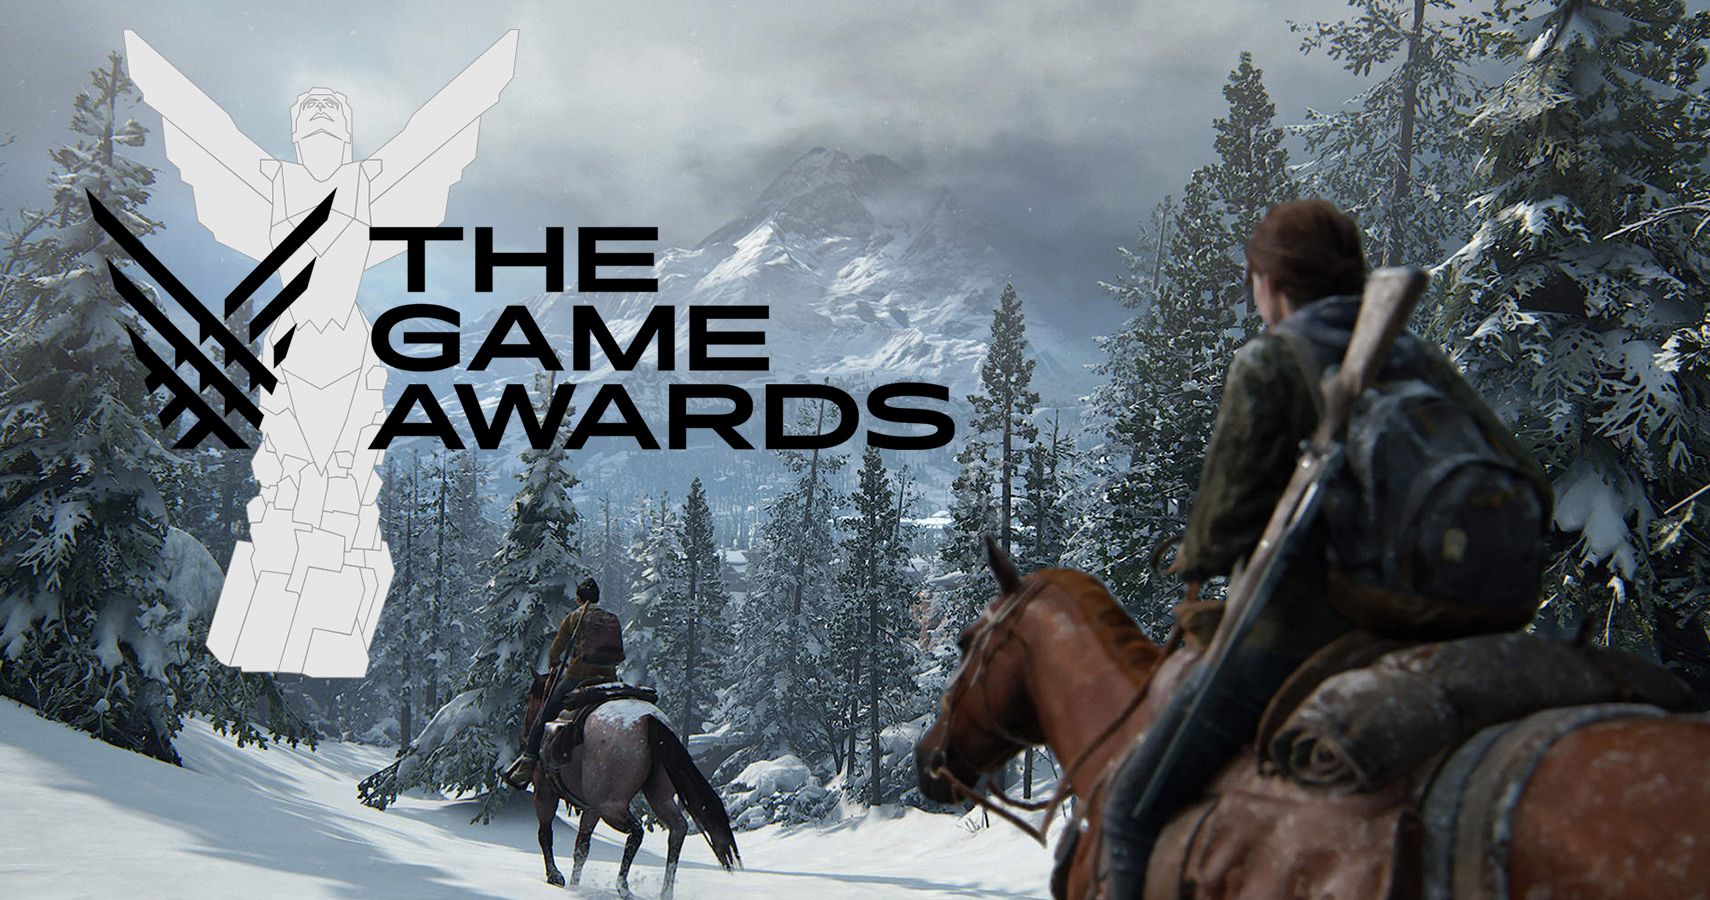 The Last of Us Part Il ganha o GOTY na The Game Awards 2020 RE